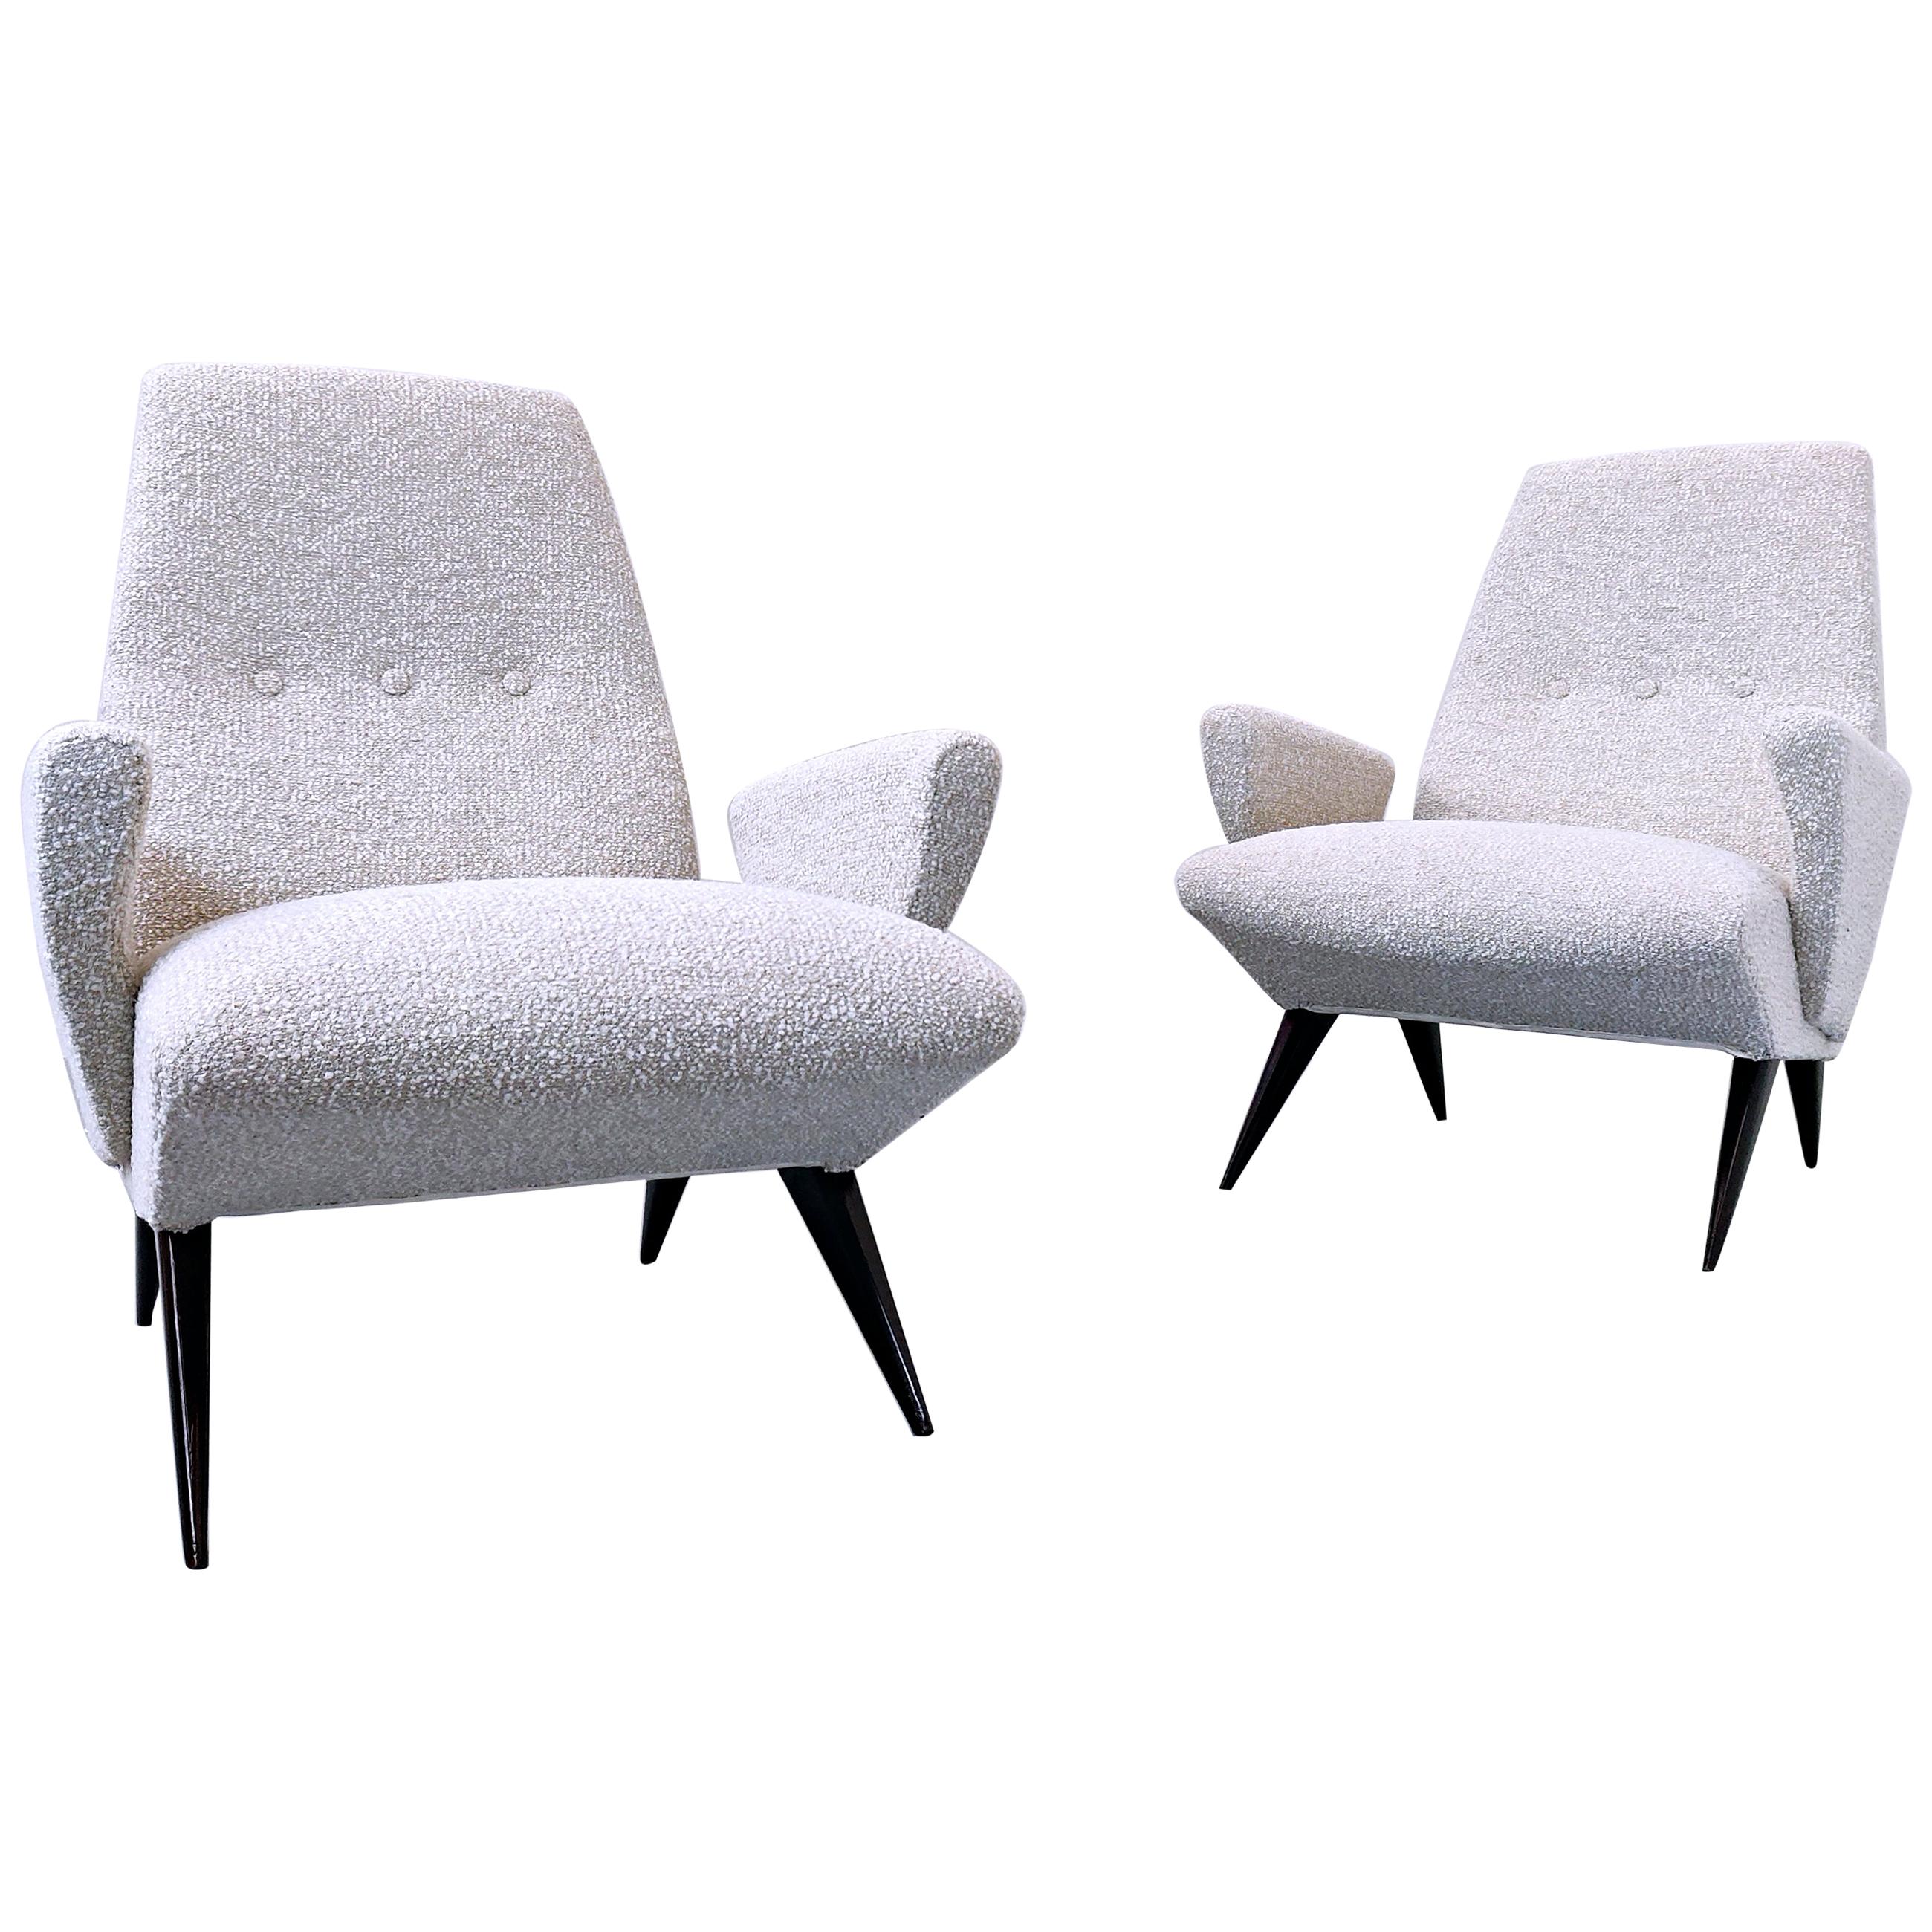 Pair of Mid-Century Modern  Armchairs by Nino Zoncada for Frimar, Italy  For Sale